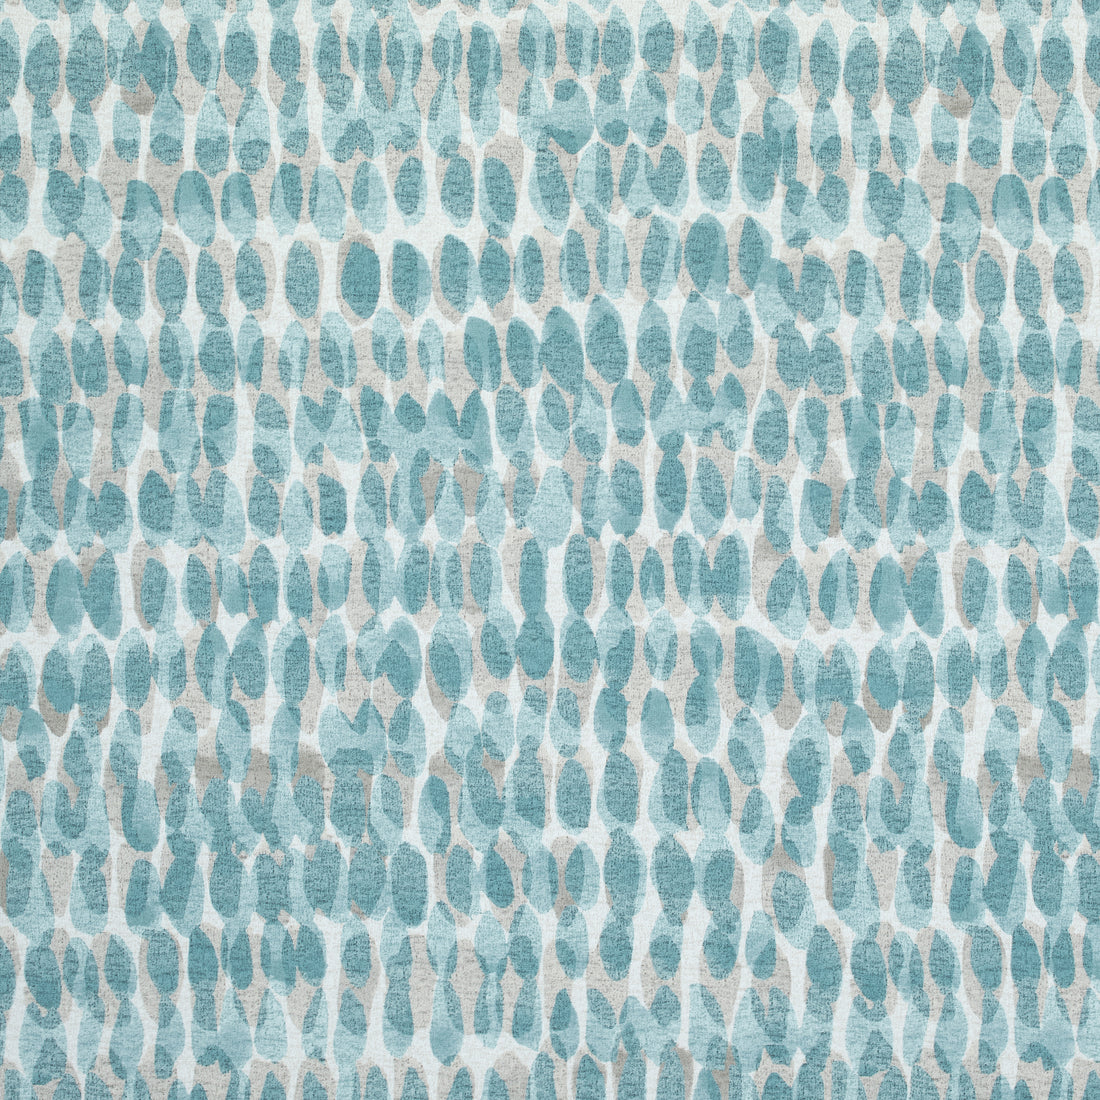 Rain Water fabric in spa blue color - pattern number F910098 - by Thibaut in the Tropics collection